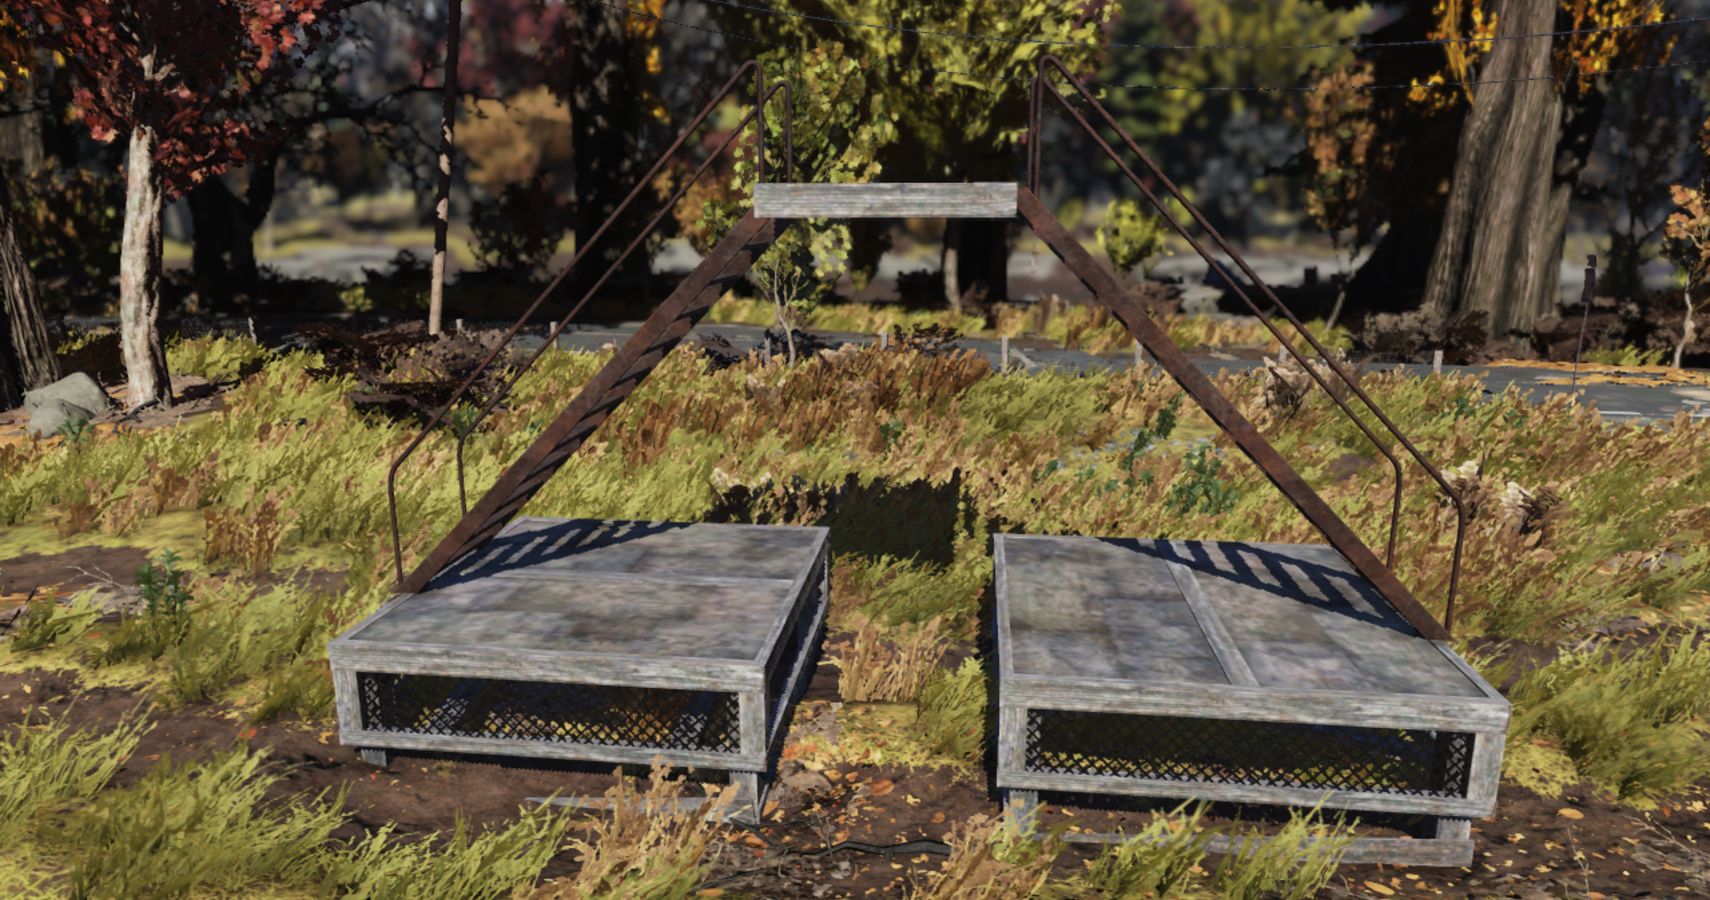 simple fallout 76 builds